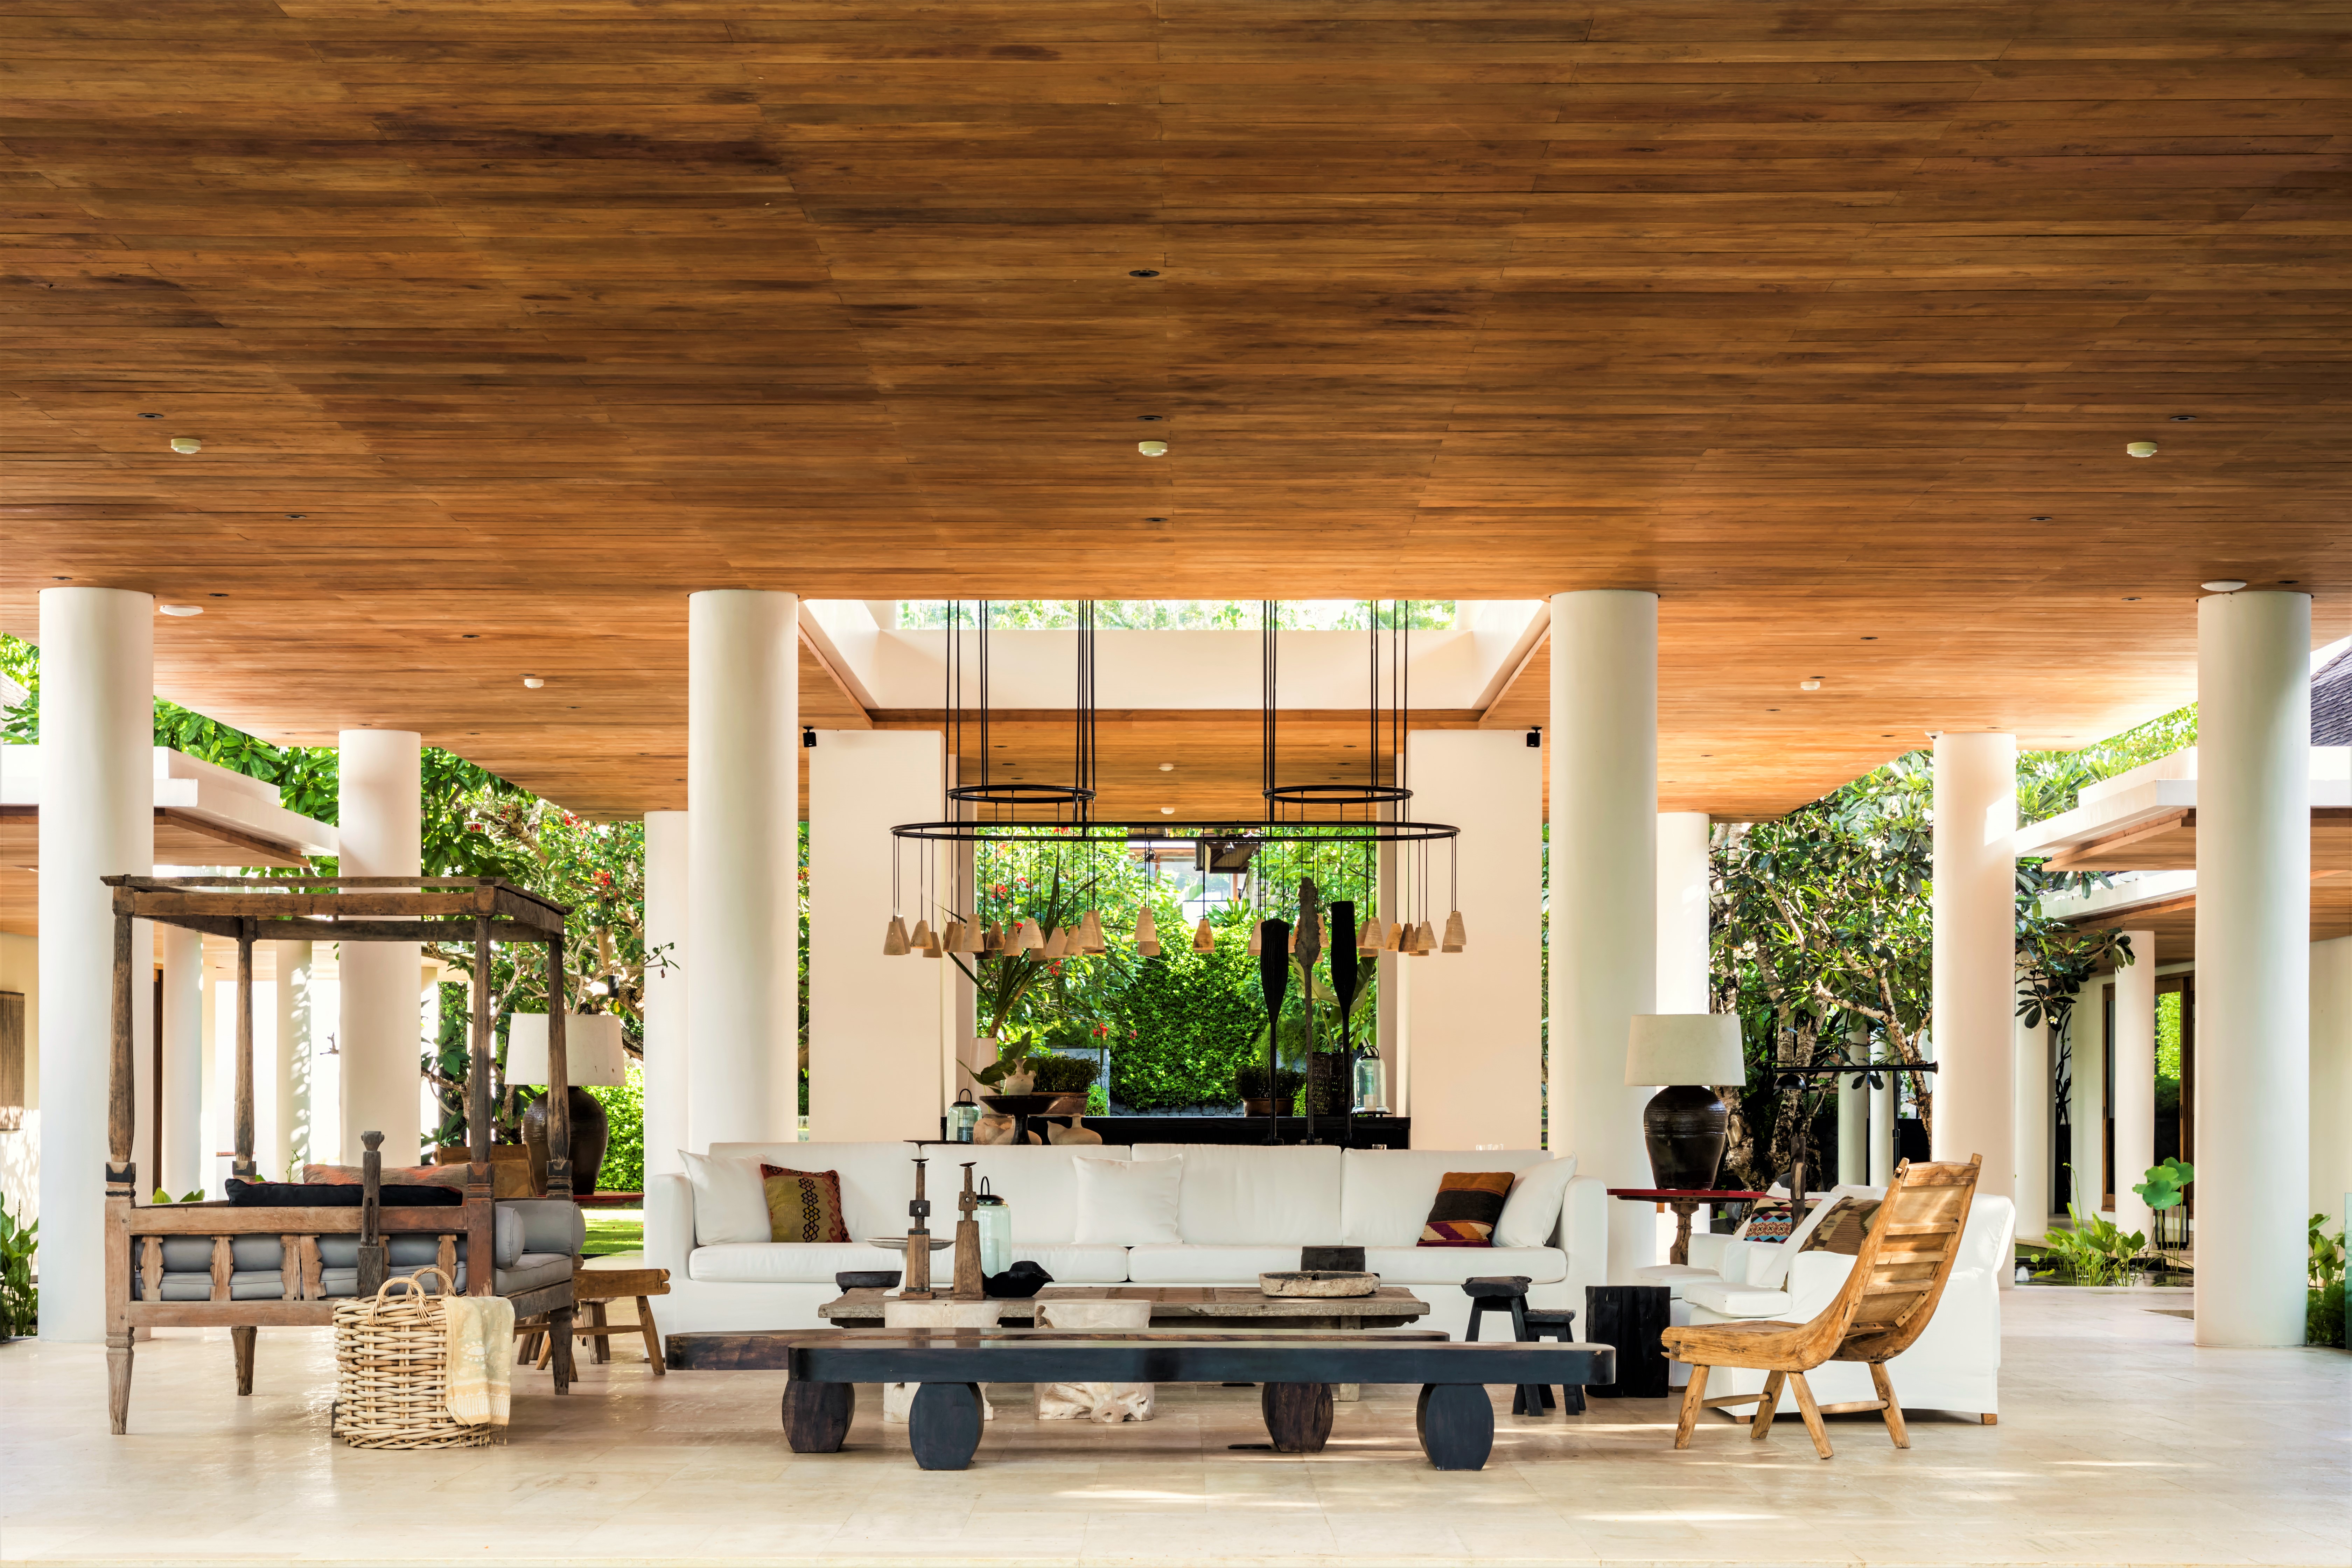 Symmetrical view of the outdoor living area at Uluwatu Estate, Bali